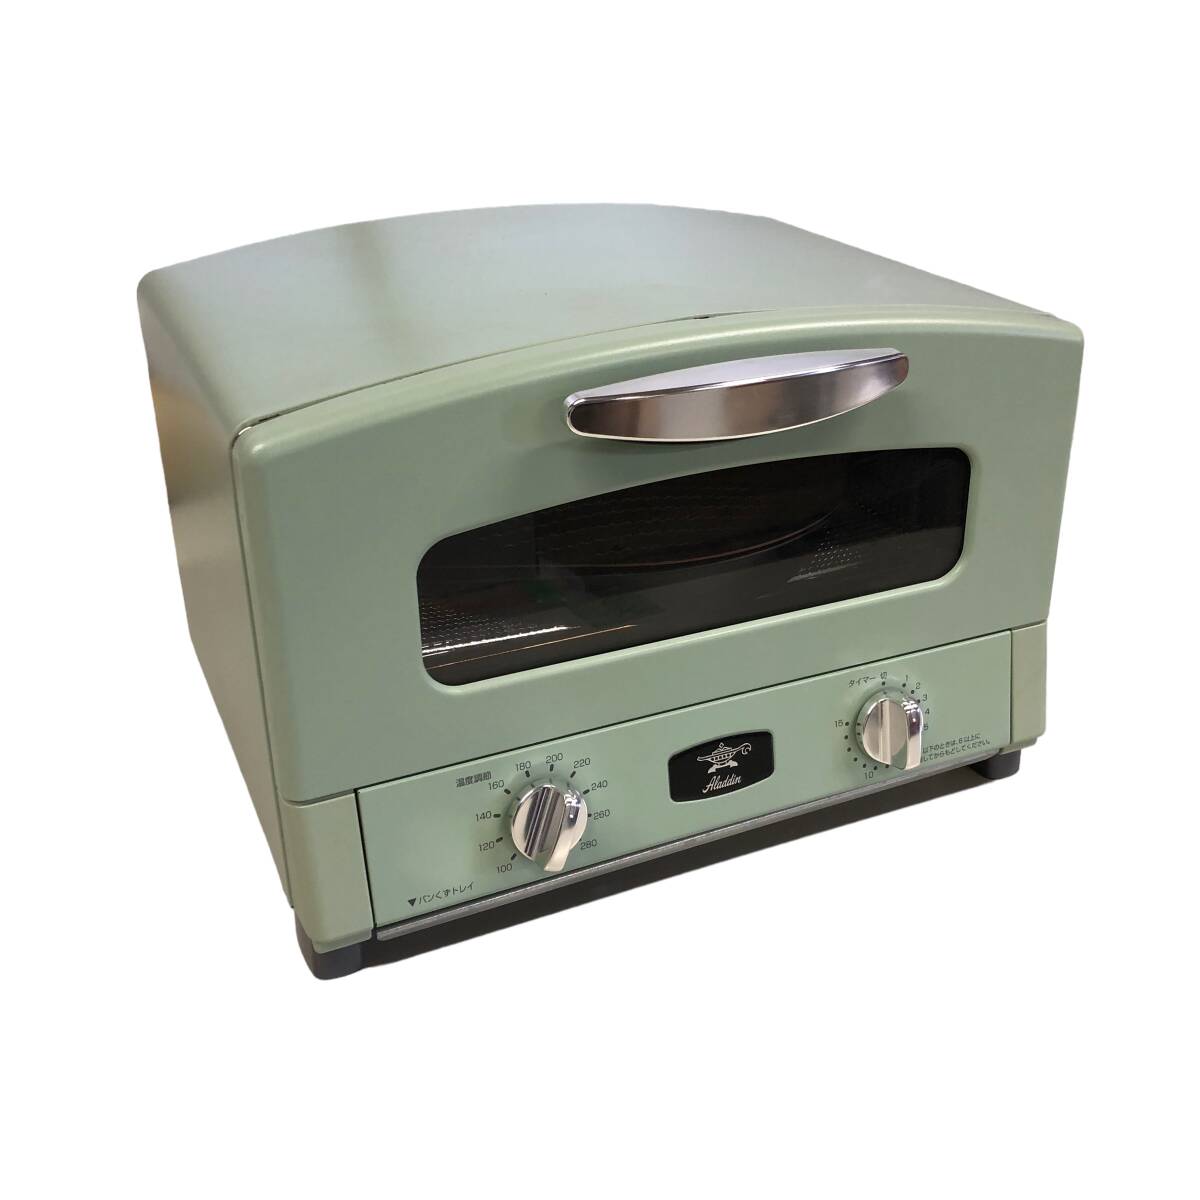 S489 Aladdin Aladdin graphite grill & toaster CAT-G13A 2021 year made direct pickup possible stone . city 